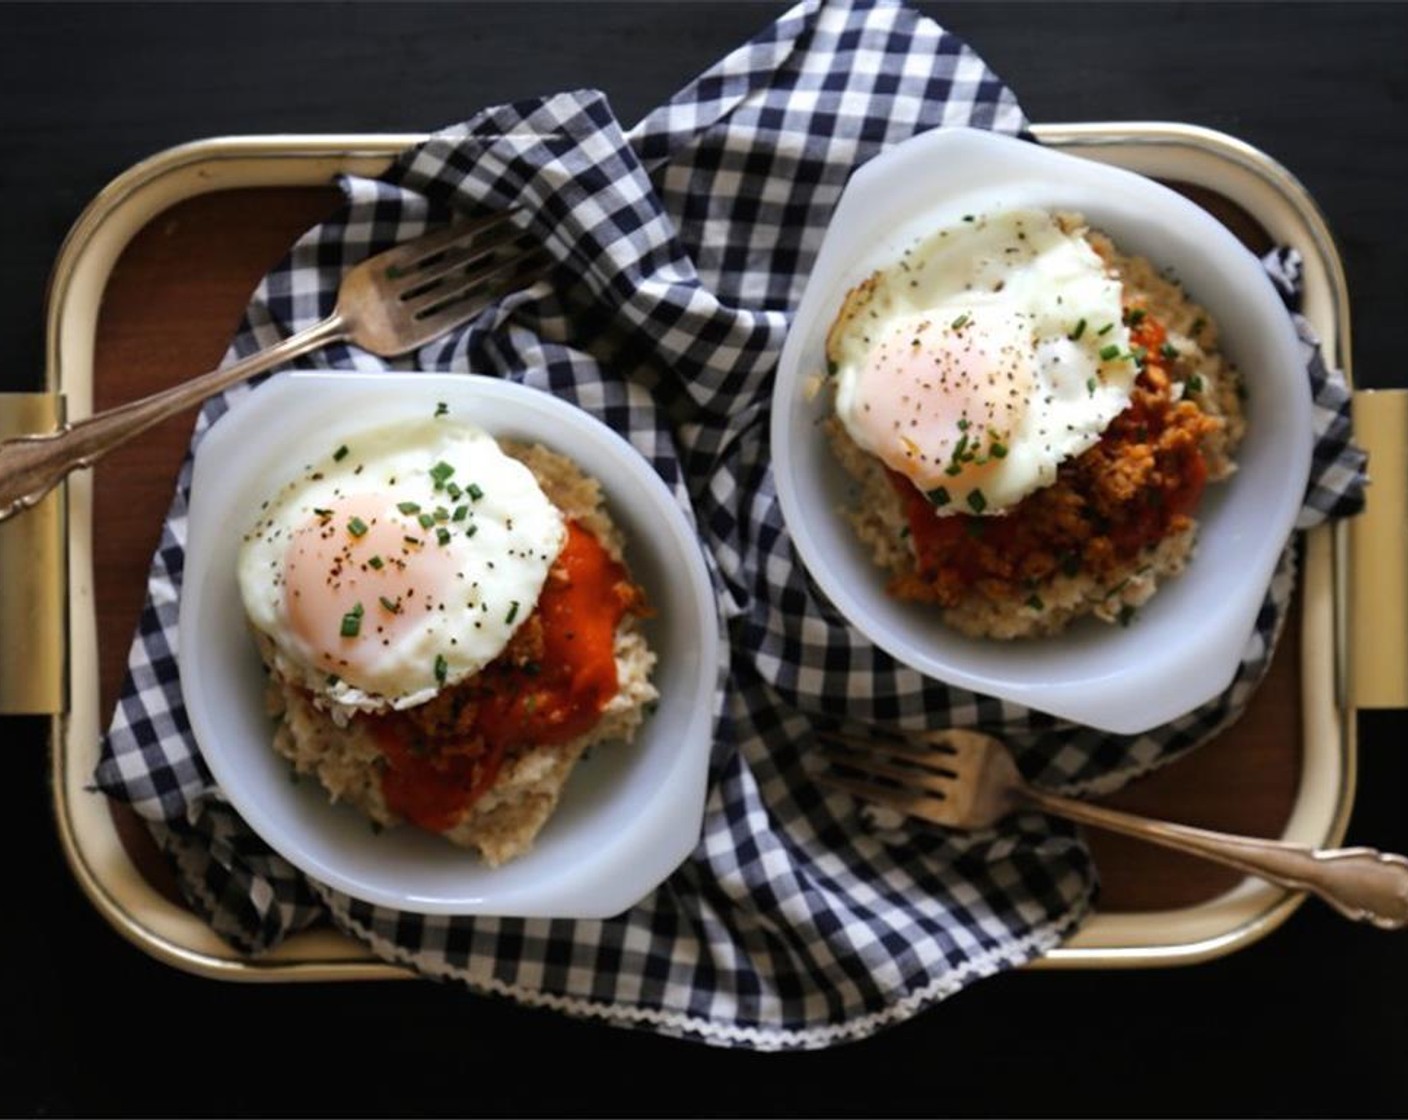 step 5 Top the oatmeal with tomato gravy, chorizo, and fried egg. Garnish with Fresh Chives (to taste) and enjoy!